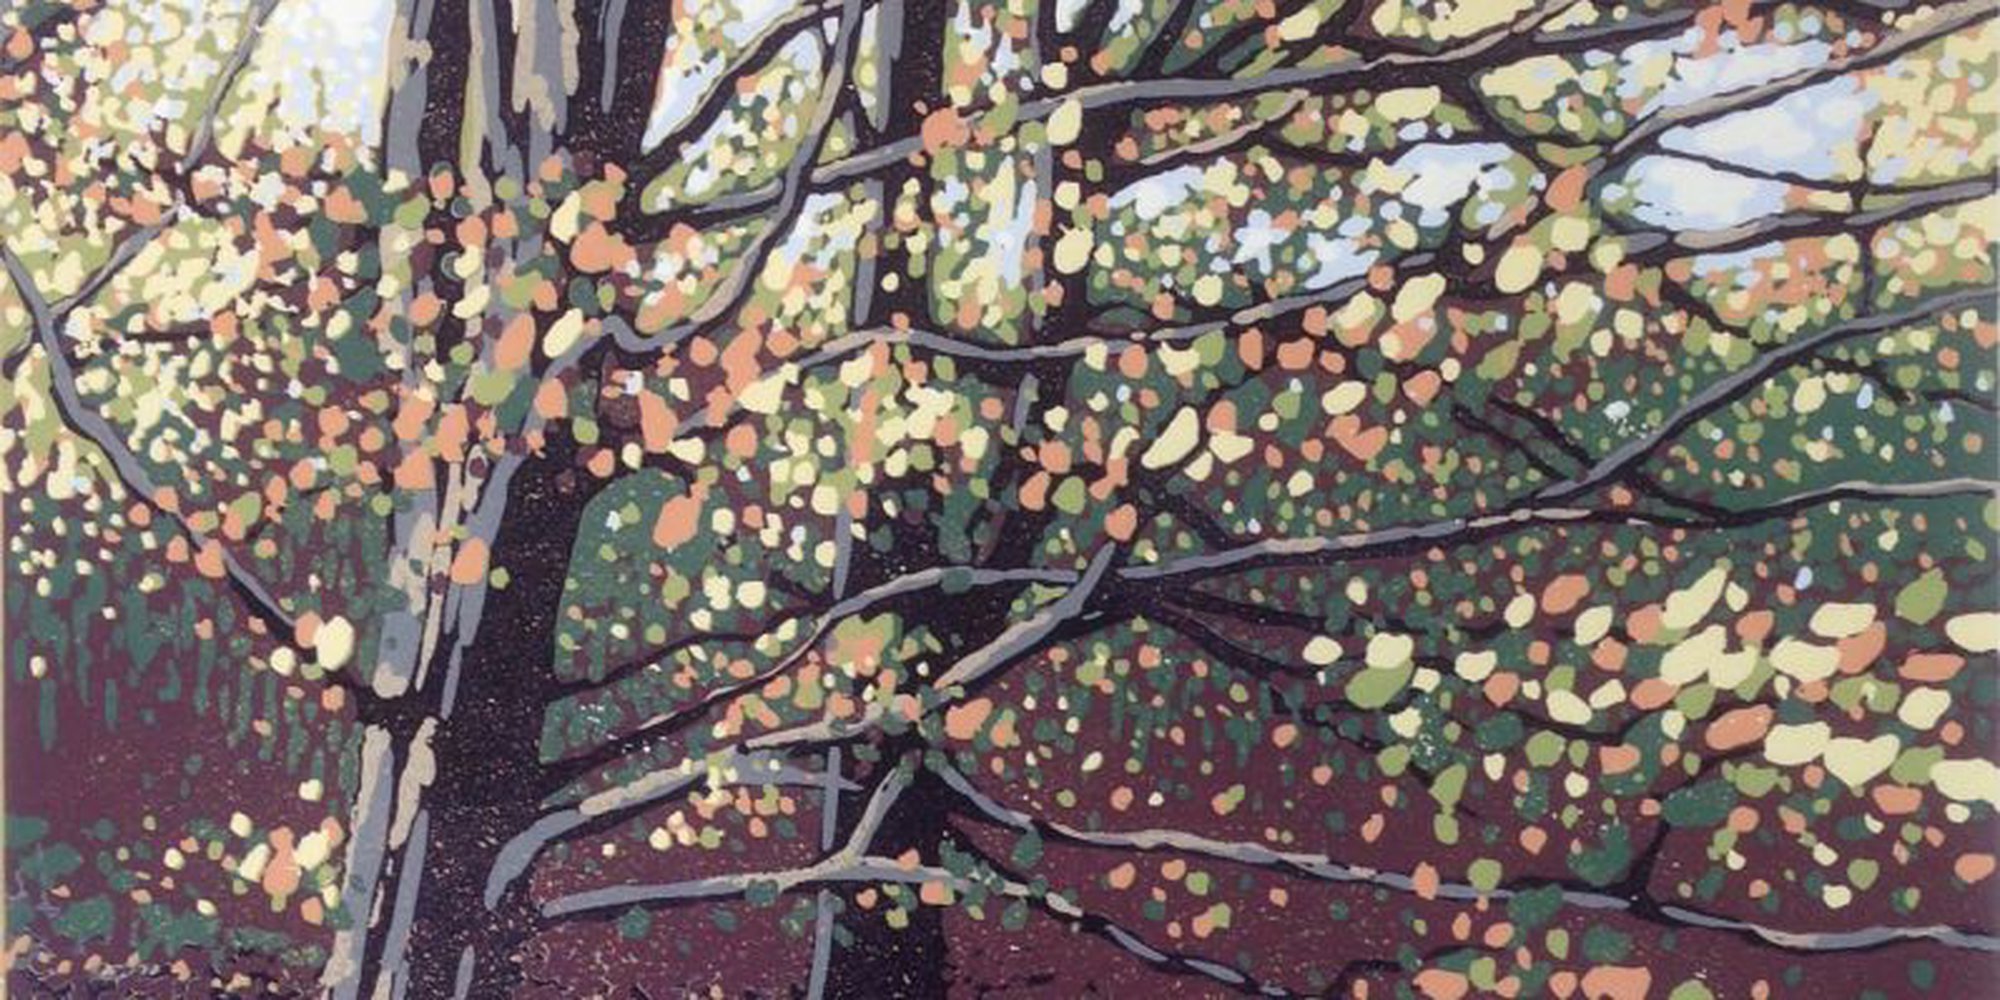 Art of the Day: "Autumn Beeches, 2016" by Alexandra Buckle